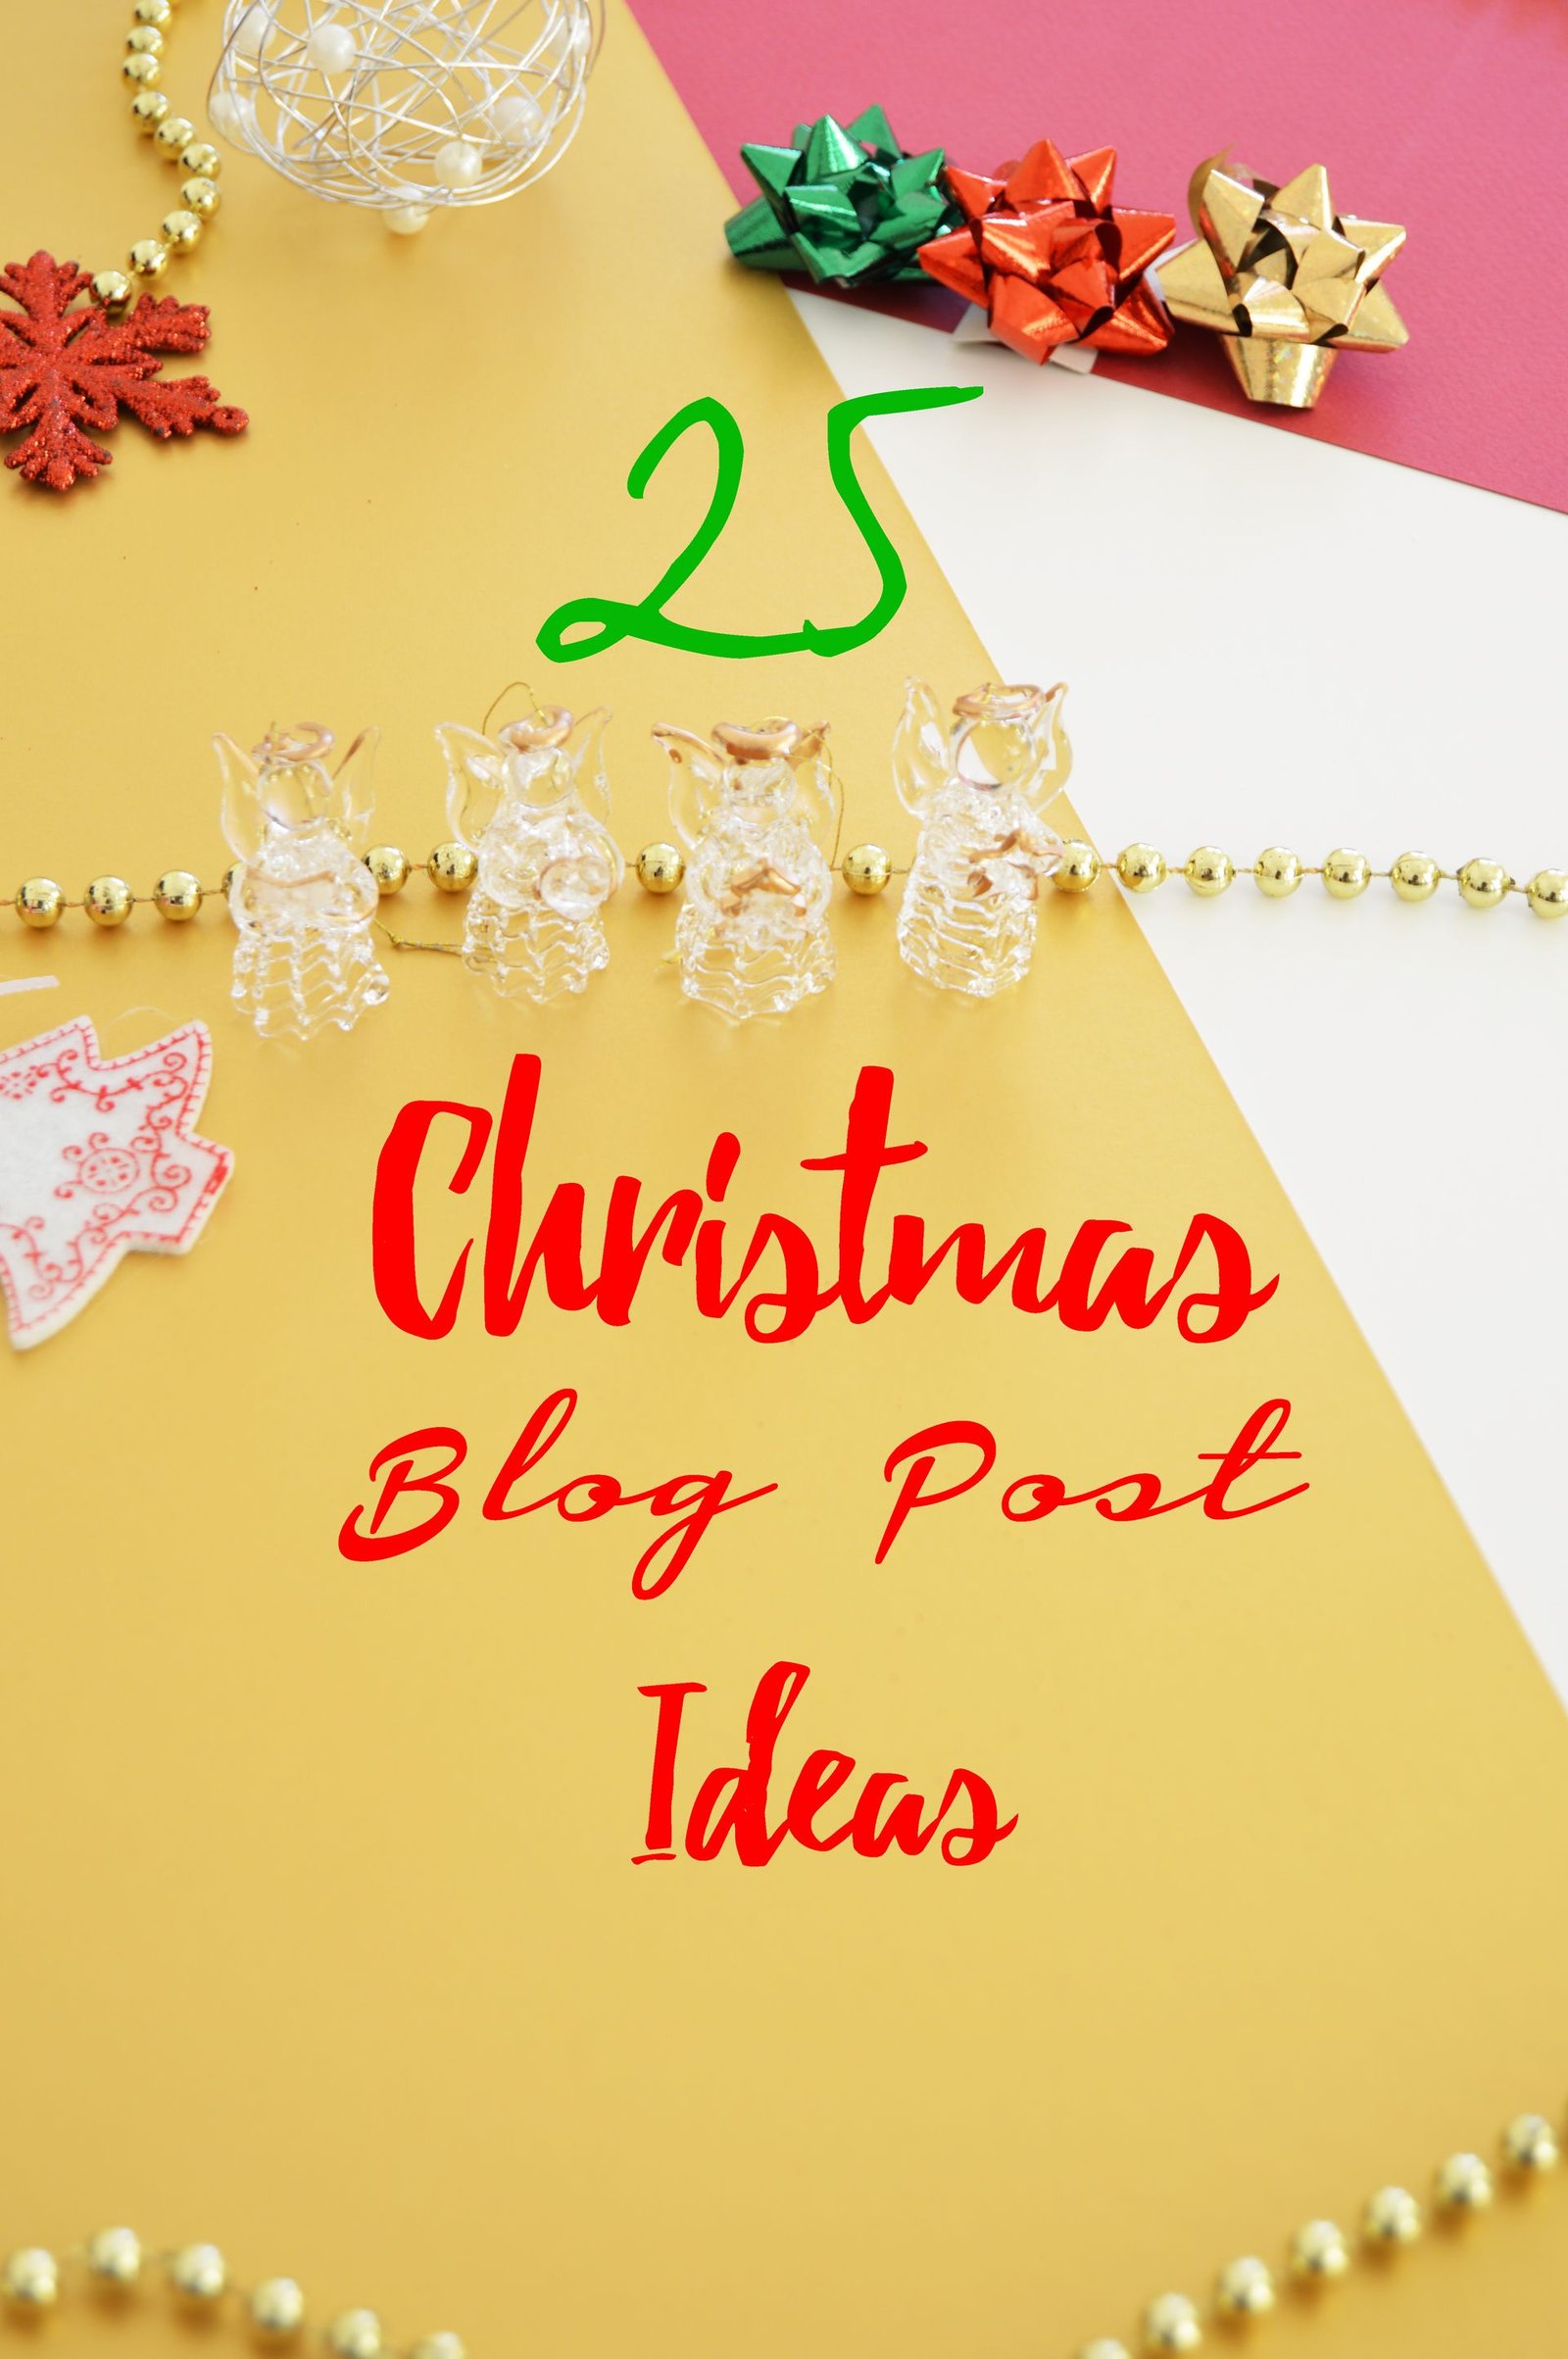 25 Christmas Blog Post Ideas - There are so many festive posts ideas that you could write about during December. From baking to beauty... whatever you could think of. In the blog post, I share 25 Christmas Blog Post Ideas to write about this festive season.